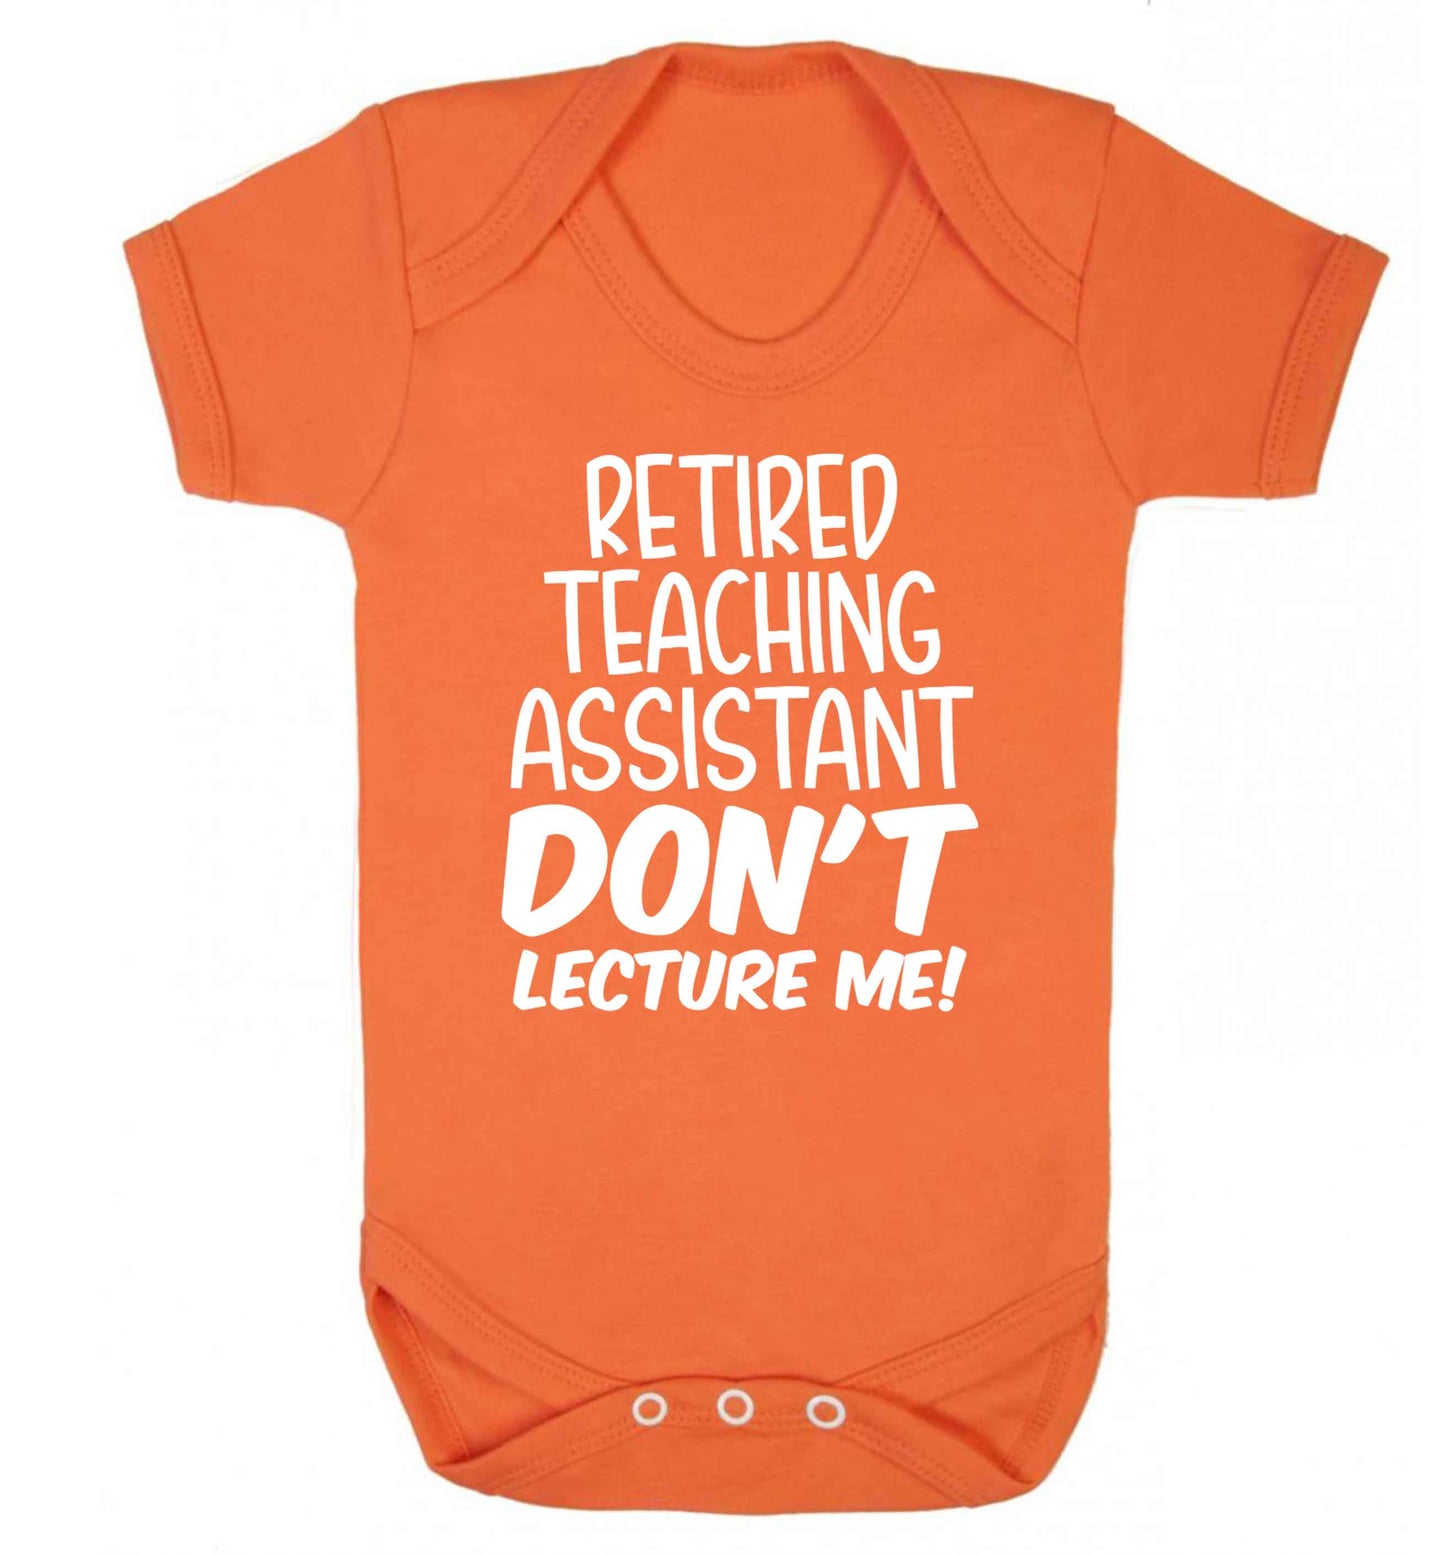 Retired teaching assistant don't lecture me Baby Vest orange 18-24 months